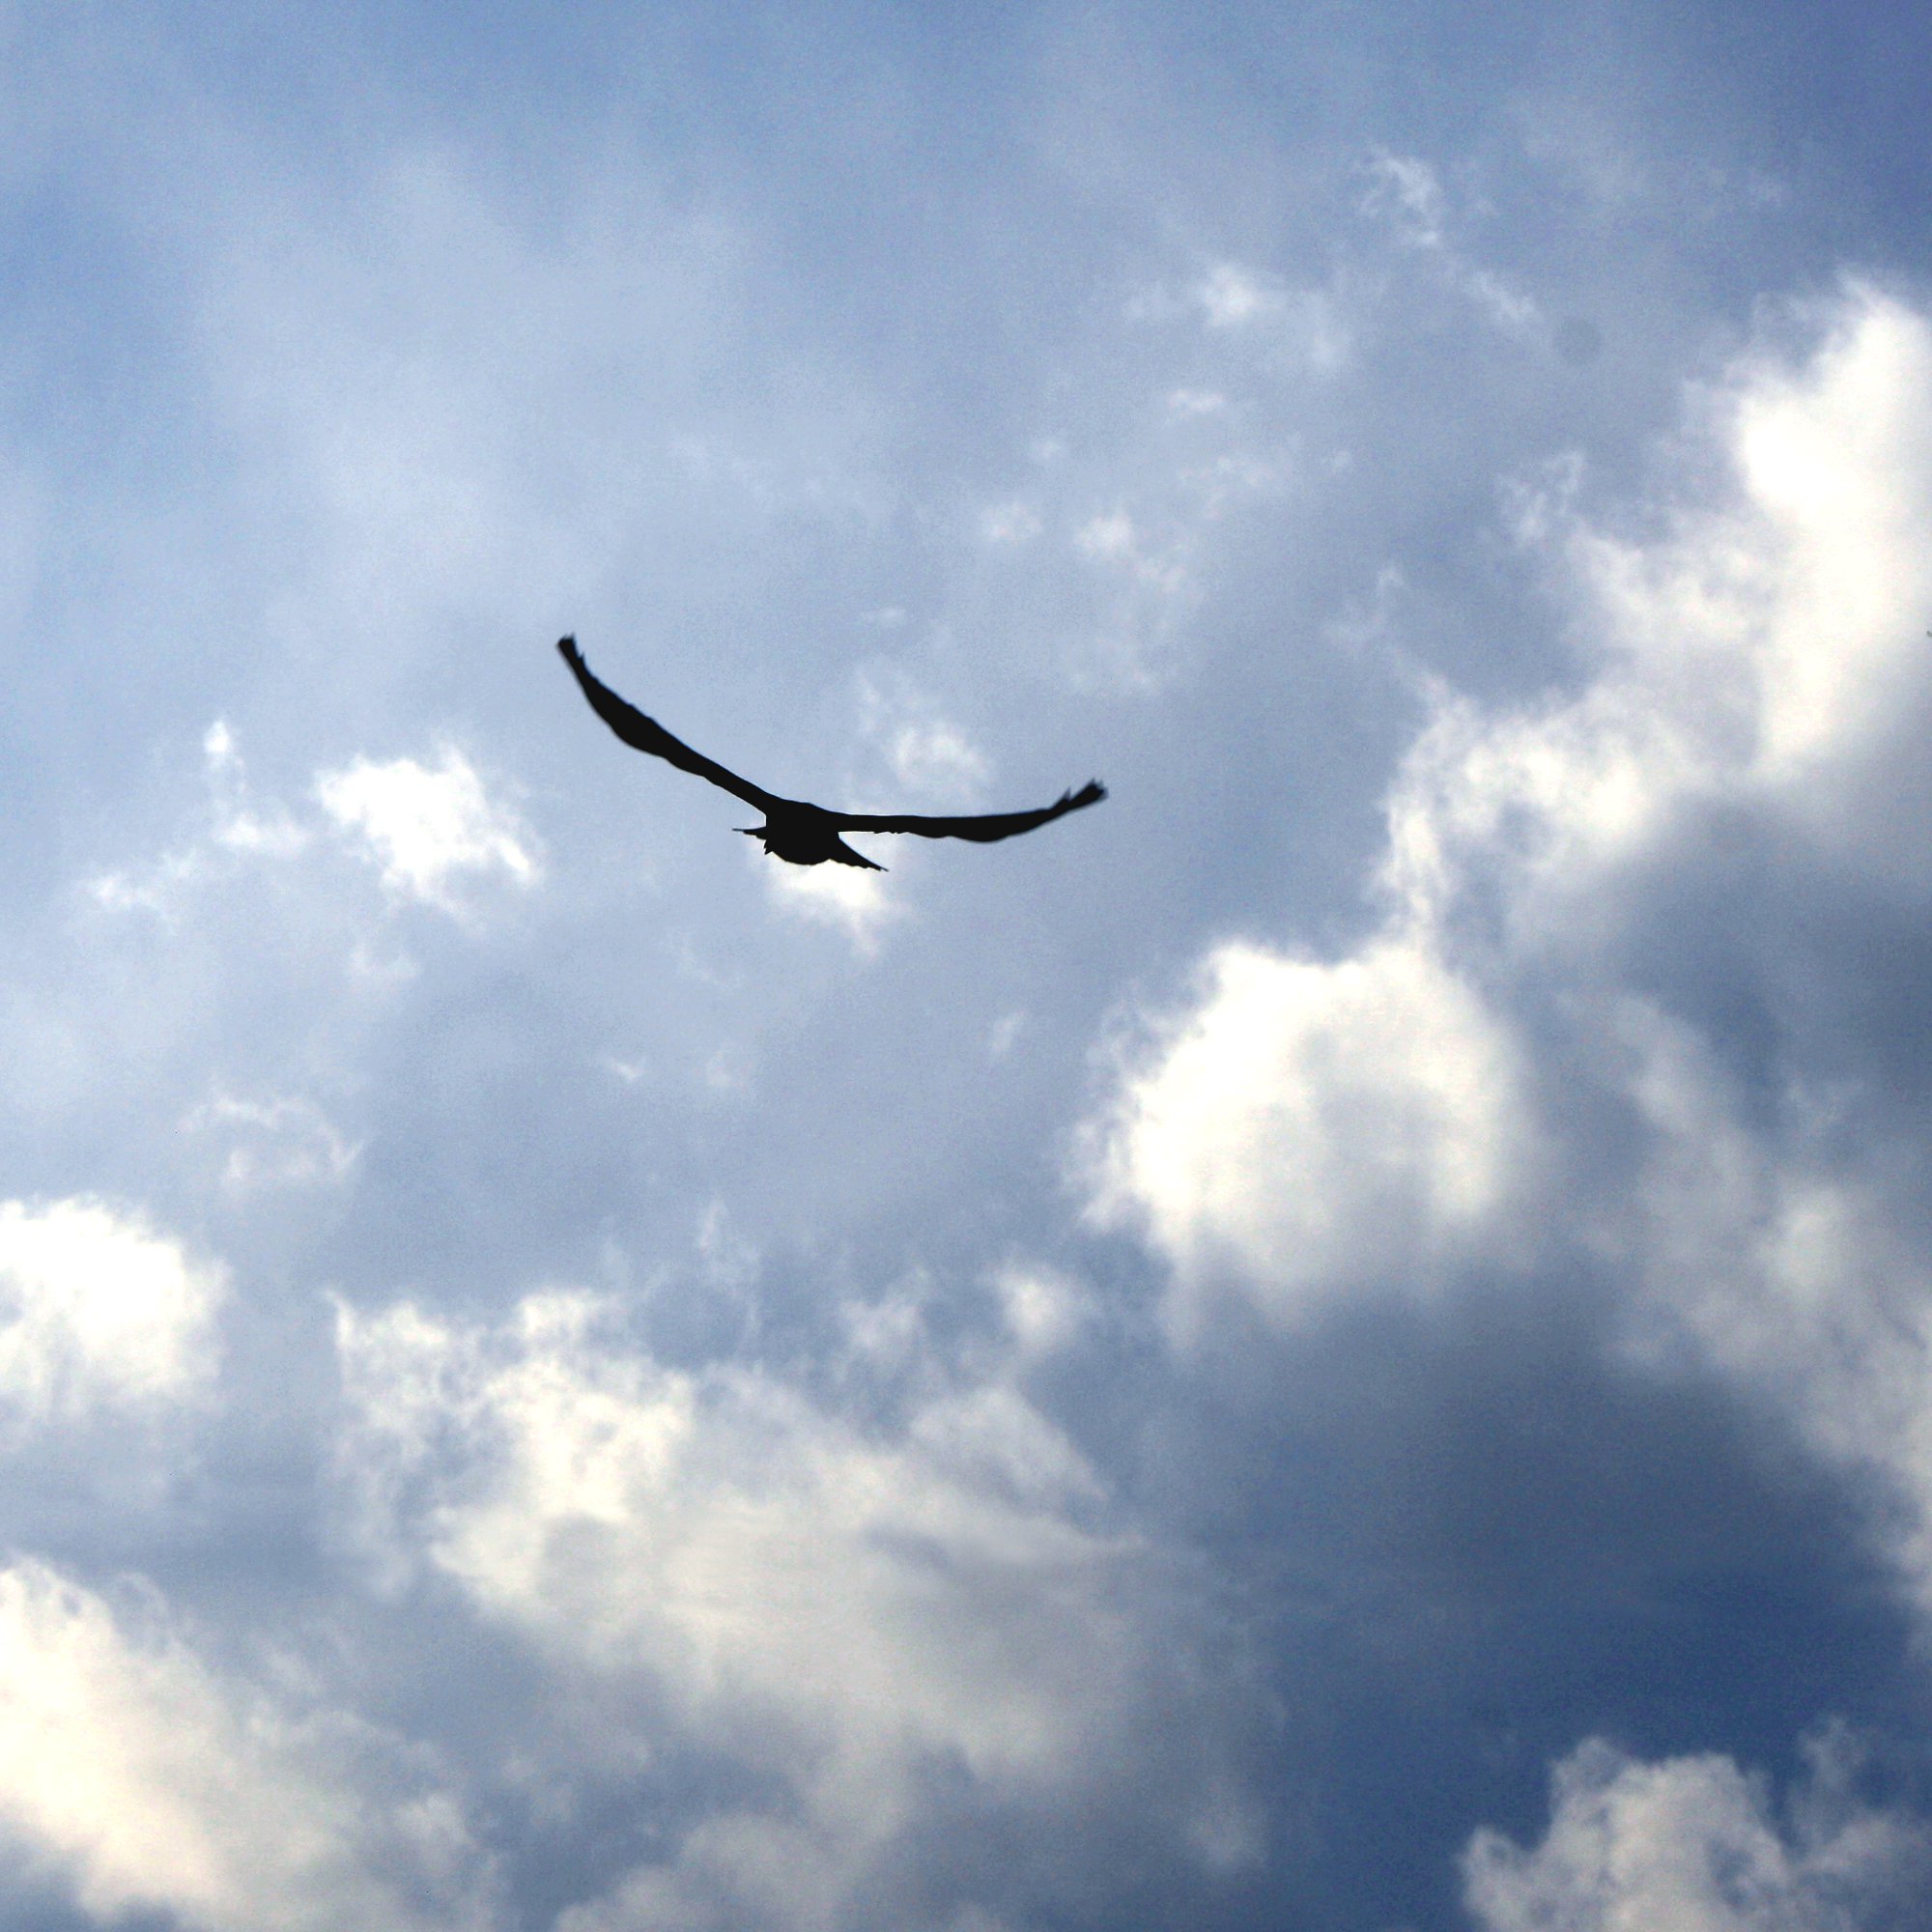 Bird Flying in Blue Sky with Clouds Picture | Free Photograph ...